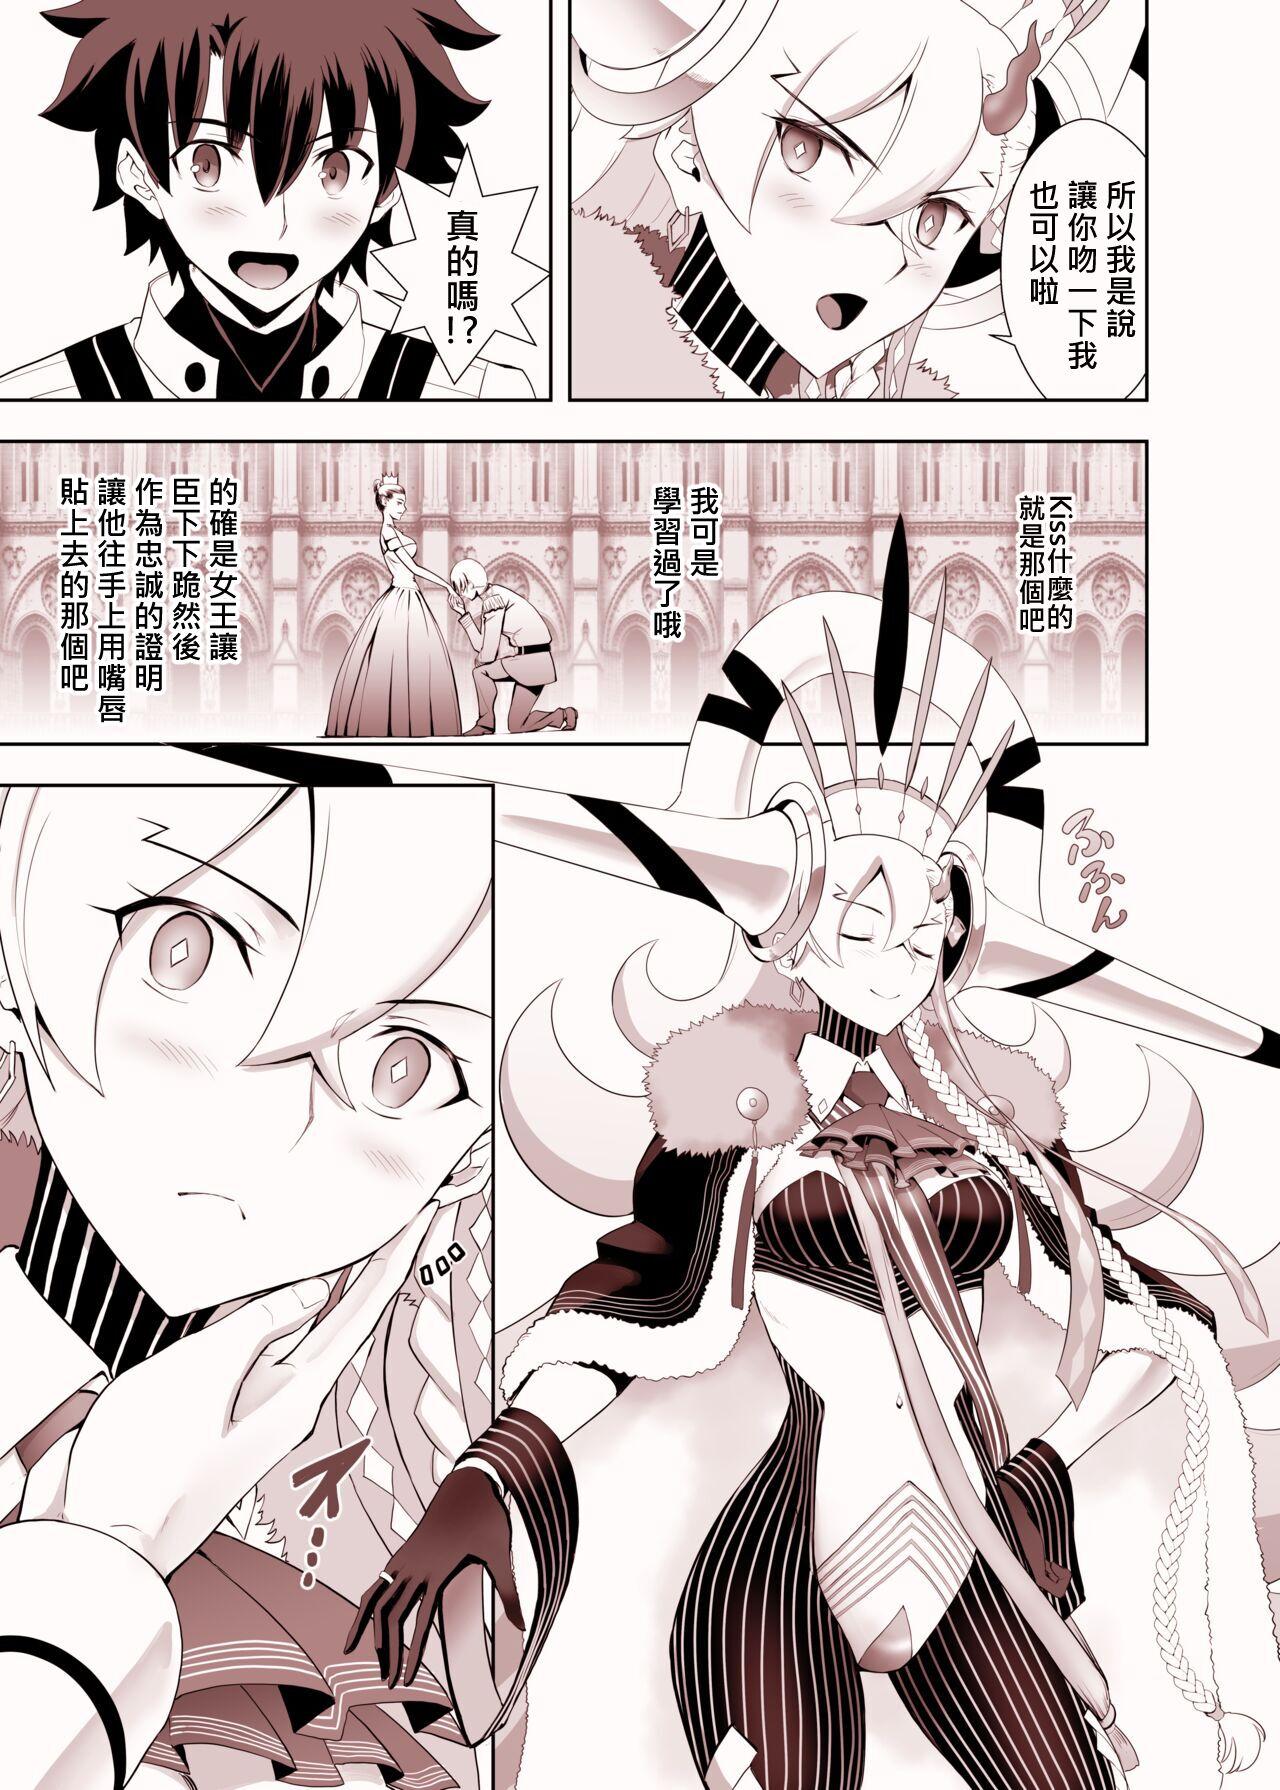 Flash Lovely U - Fate grand order Mas - Page 4